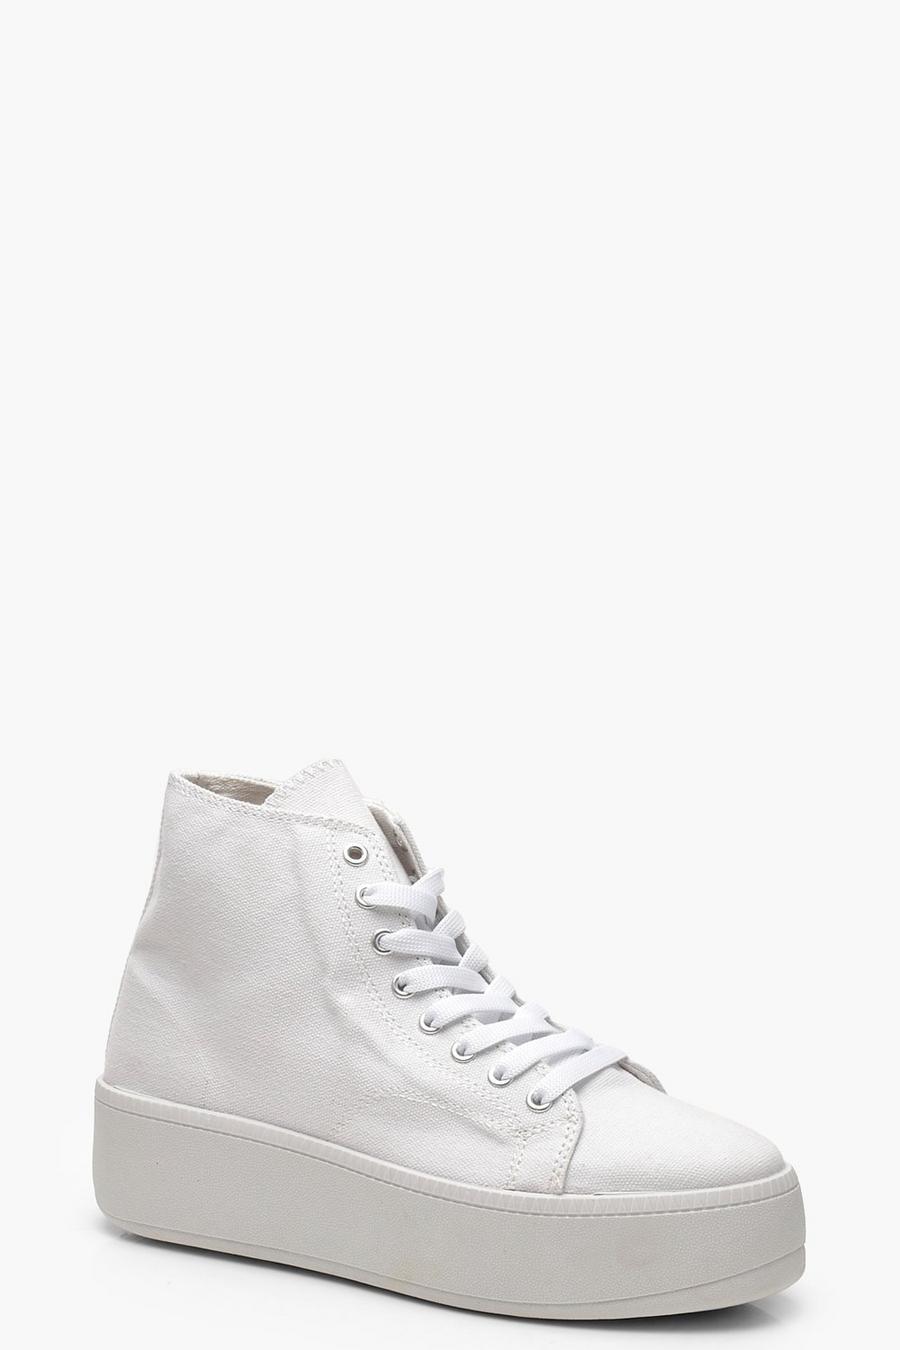 White Platform High Top Sneakers image number 1